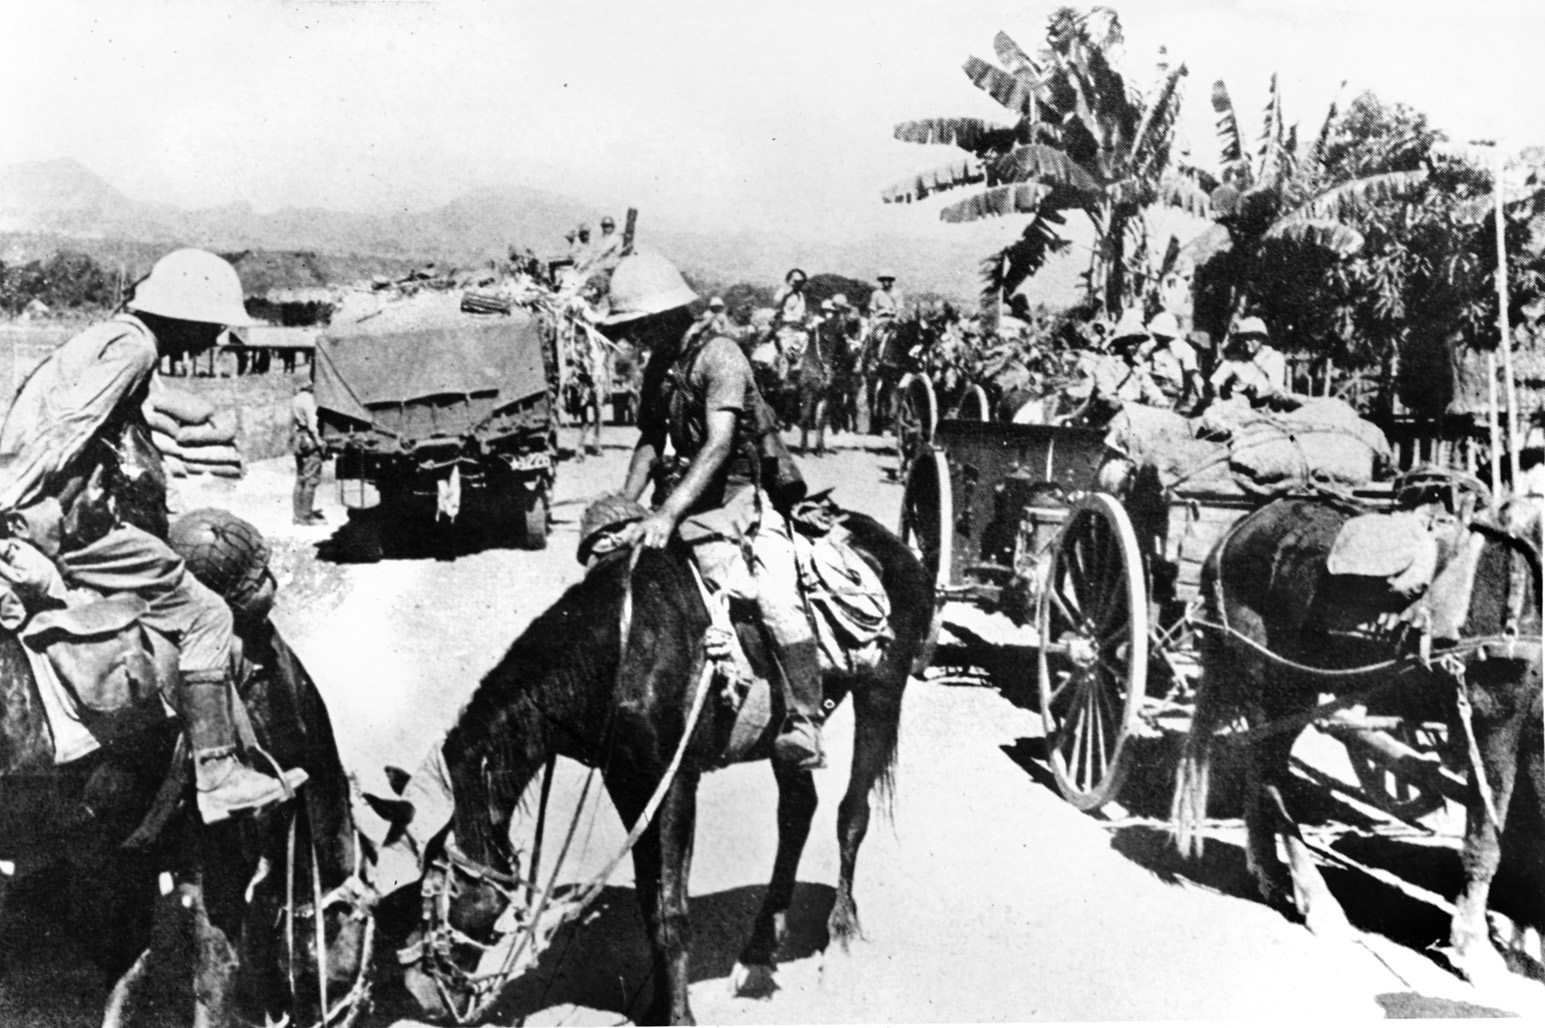 Japanese soldiers, some mounted on horseback, prepare to resupply their troops fighting on the front lines against the American and Filipino defenders of the Bataan Peninsula and the island of Corregidor.